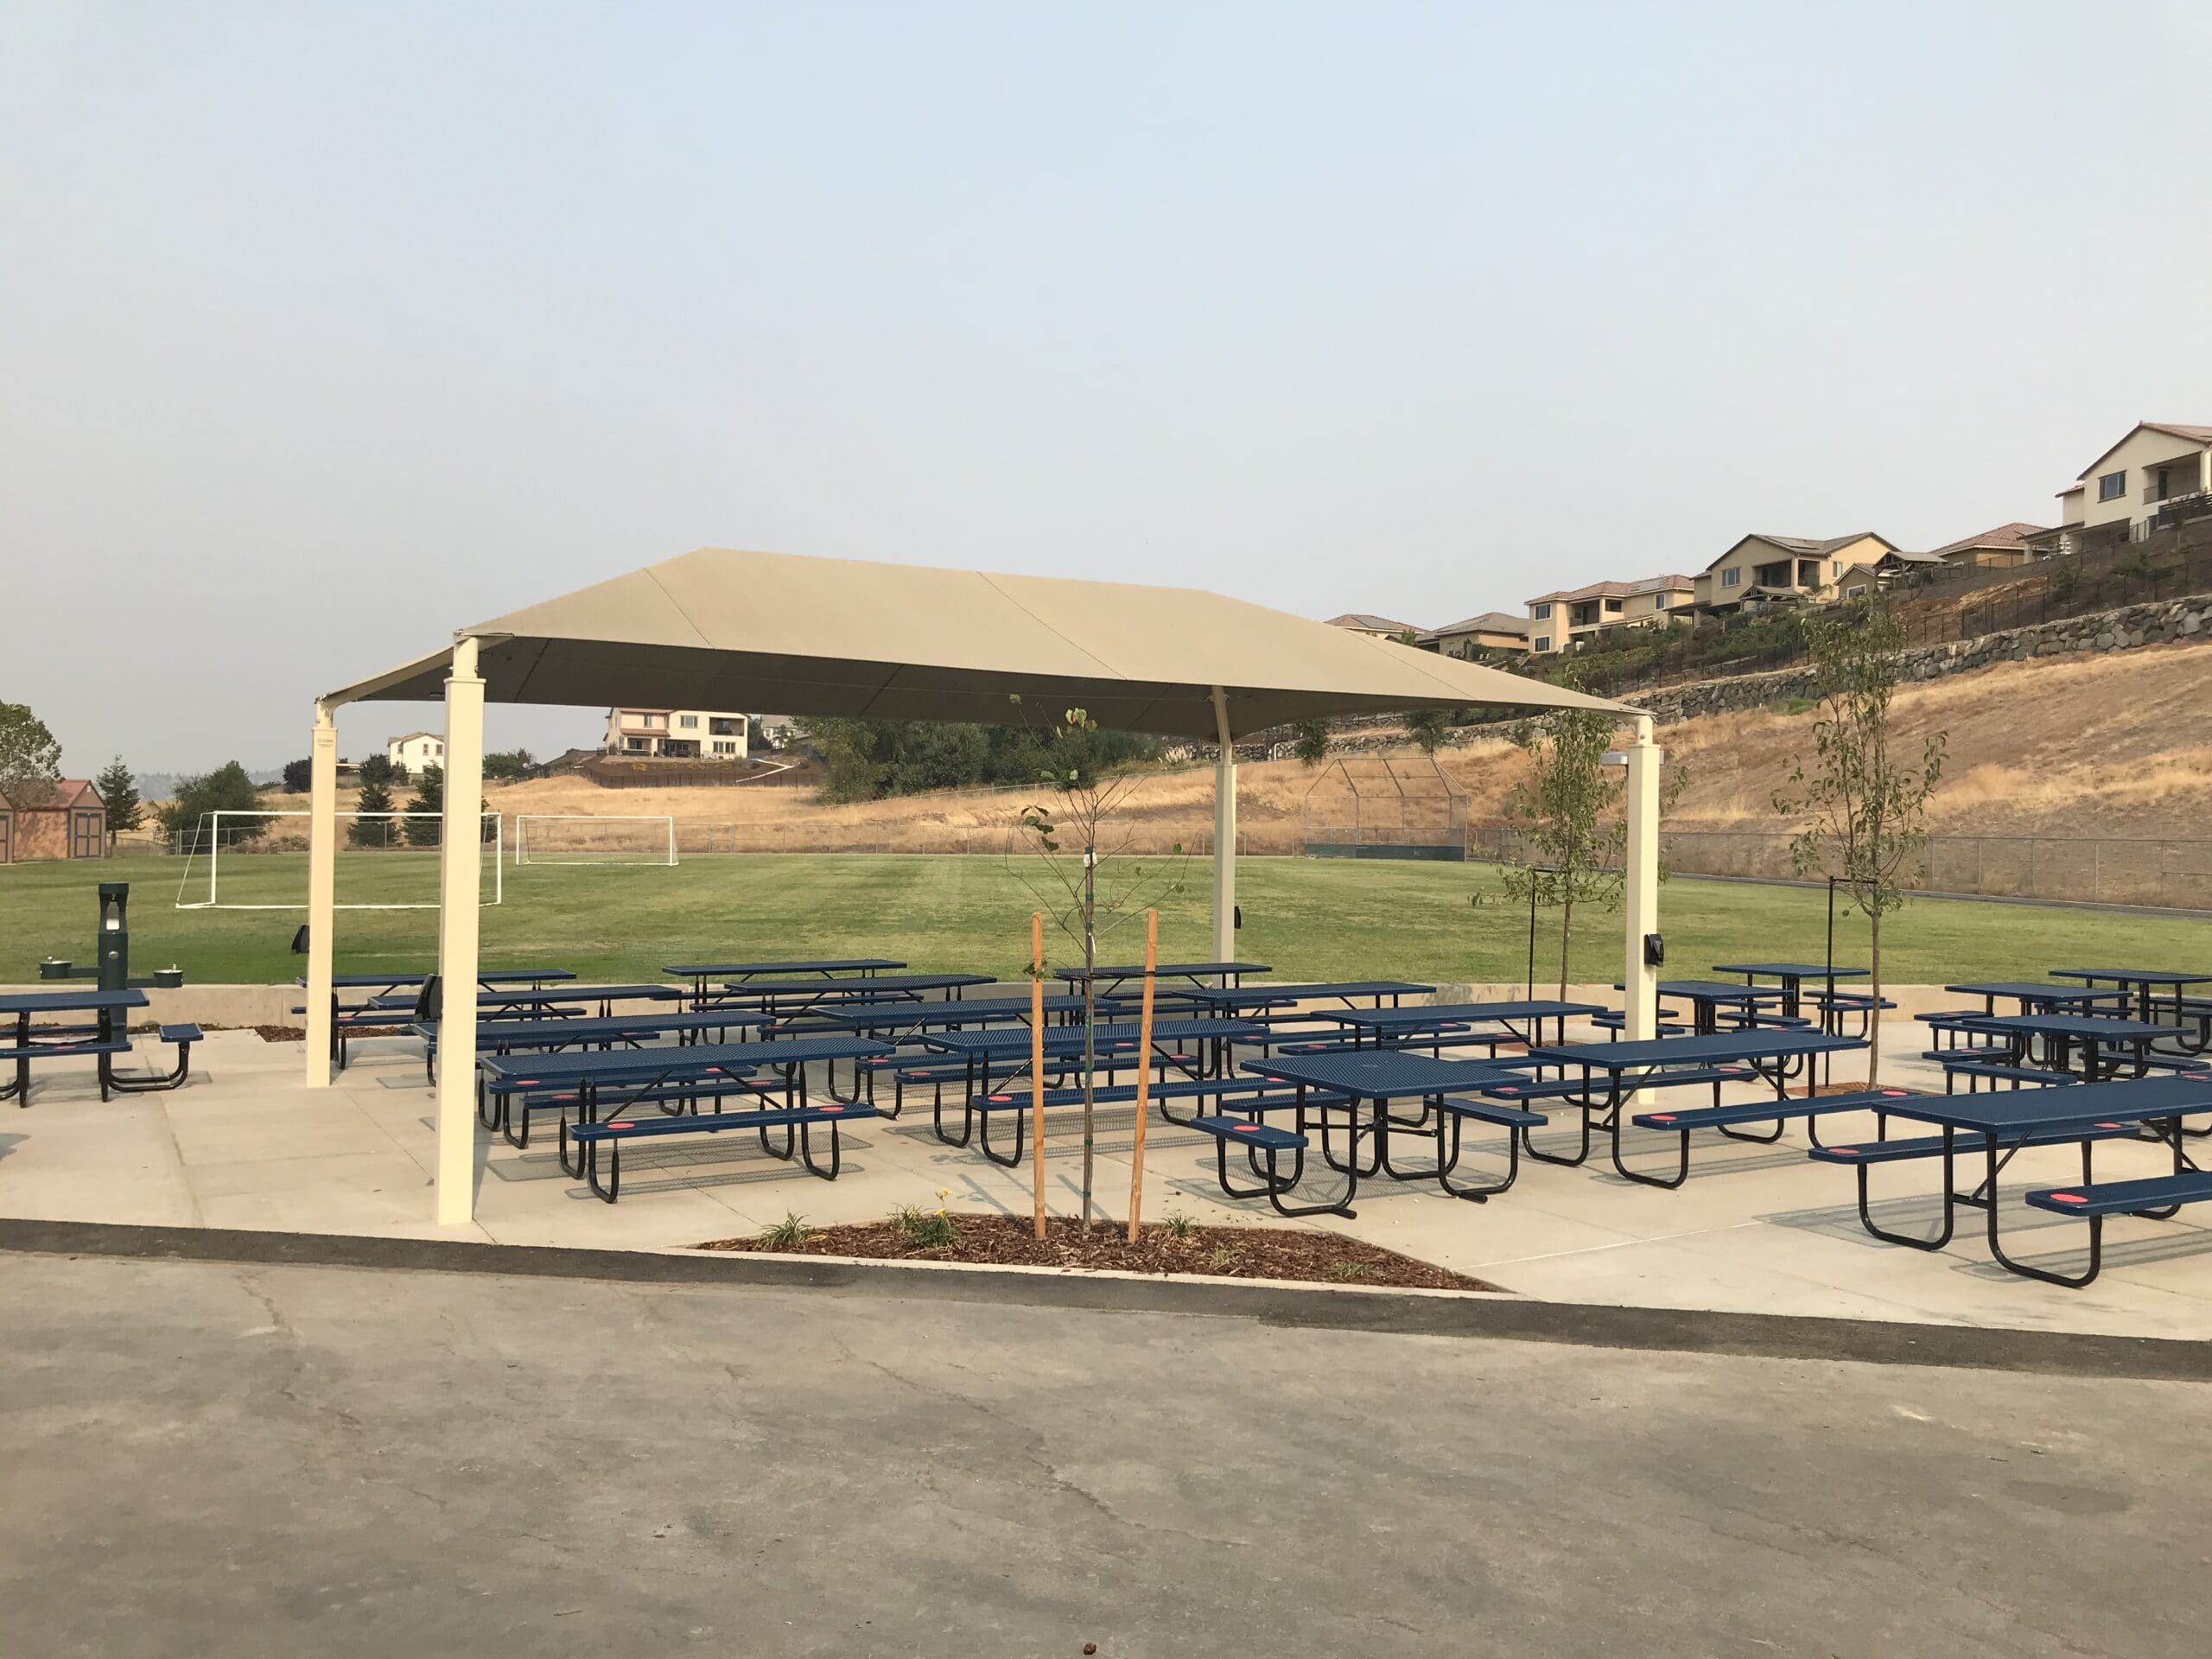 4 post usa shade covering outdoor picnic area